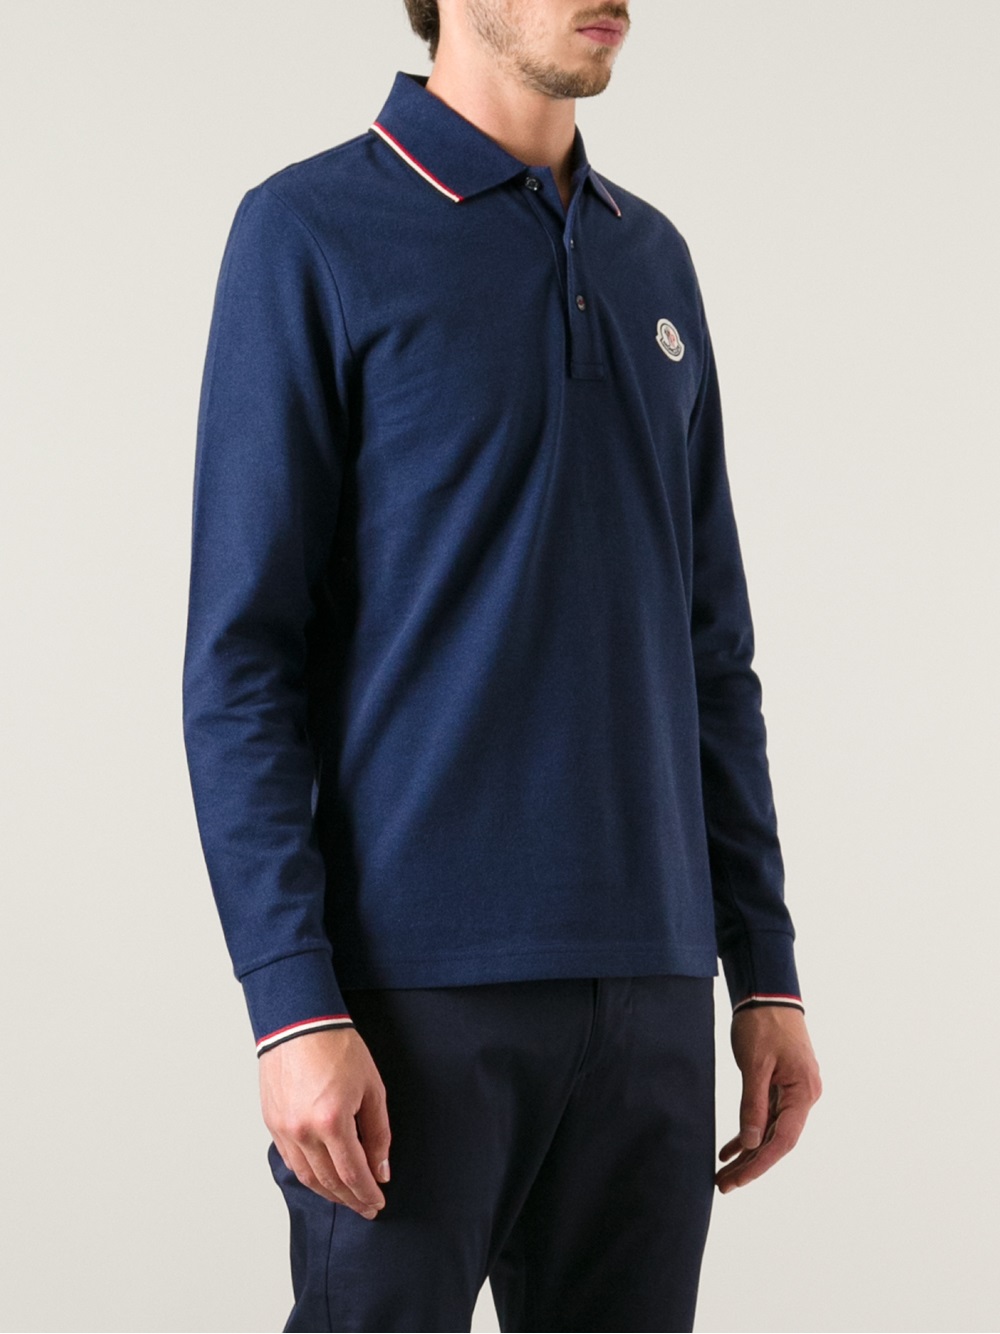 Moncler Long Sleeve Polo Shirt in Blue for Men - Lyst